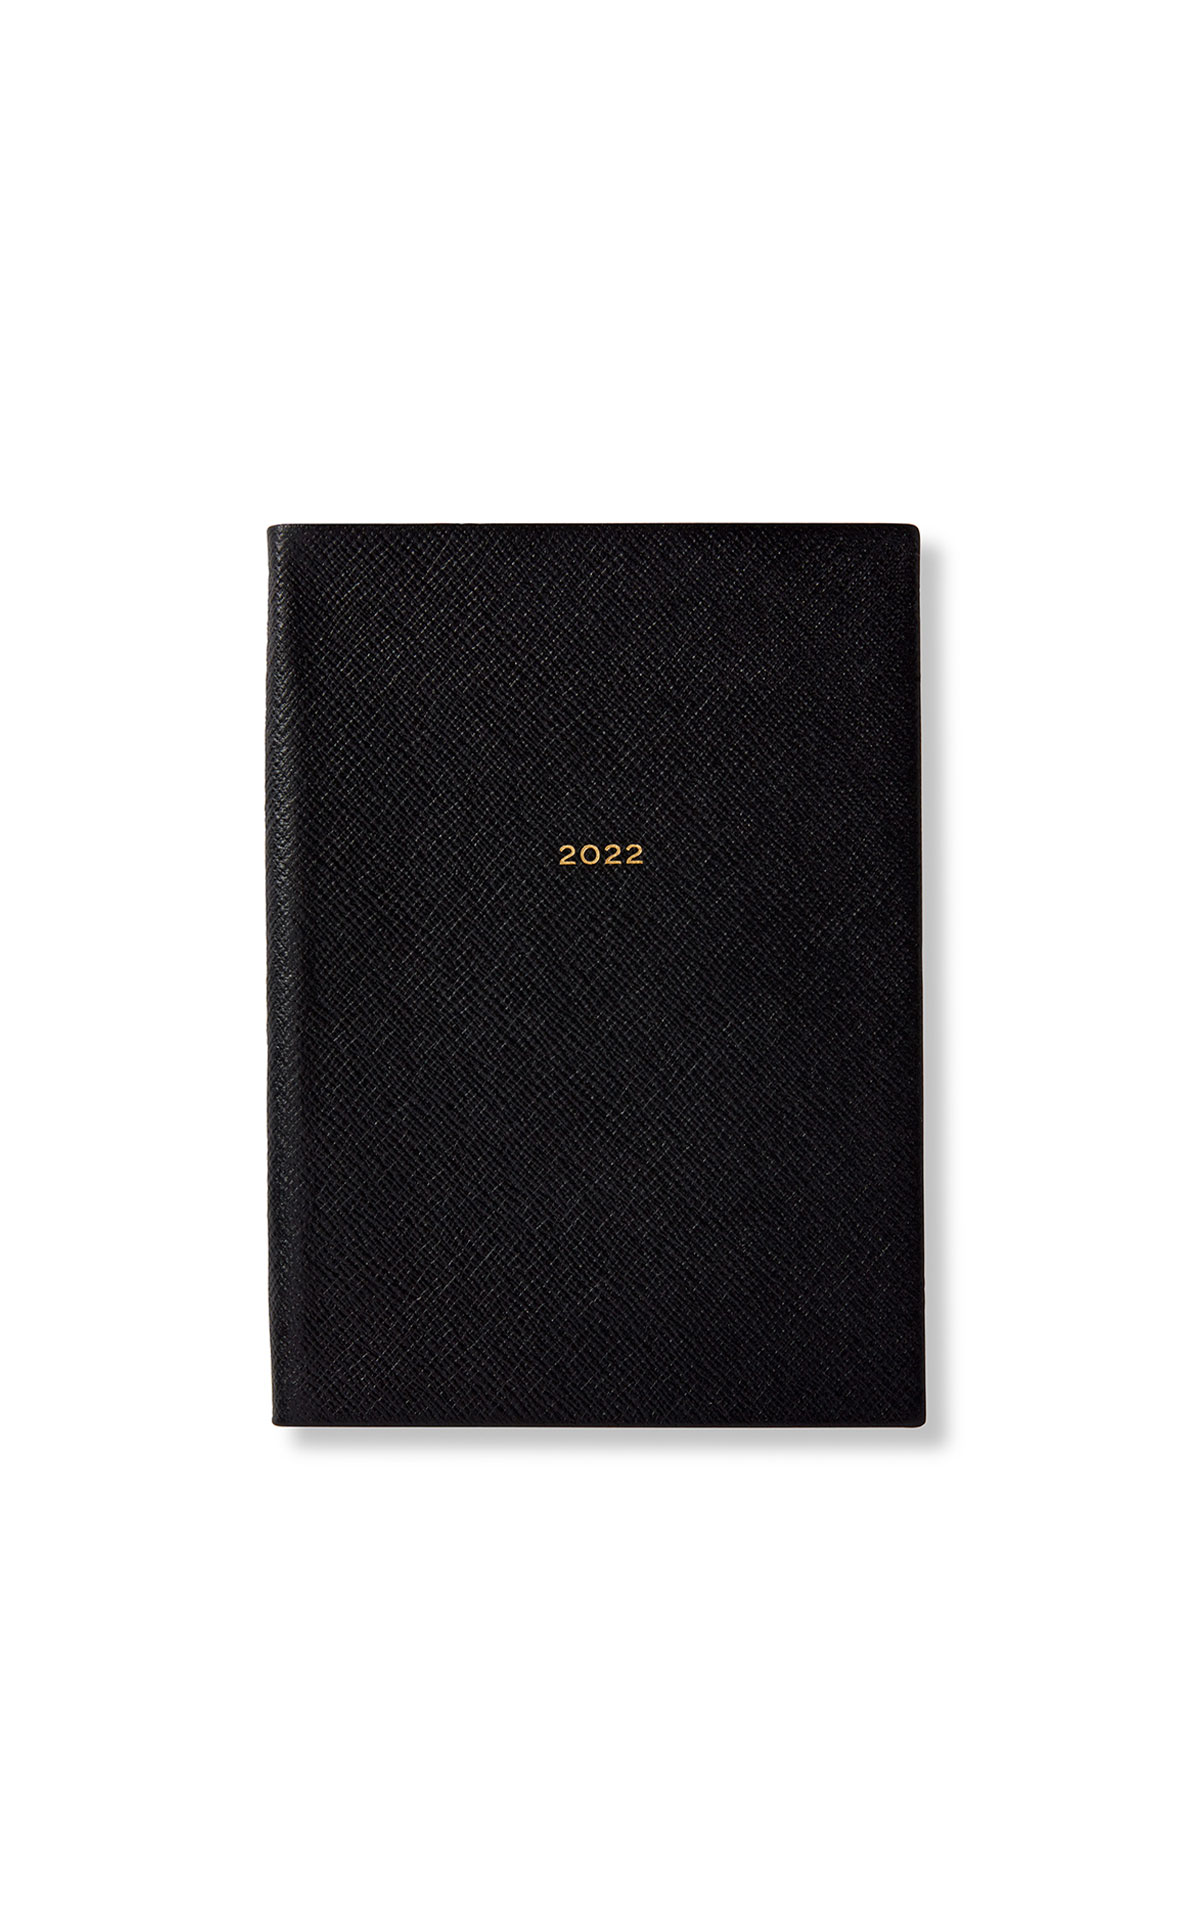 Smythson 2022 Soho diary with pocket from Bicester Village